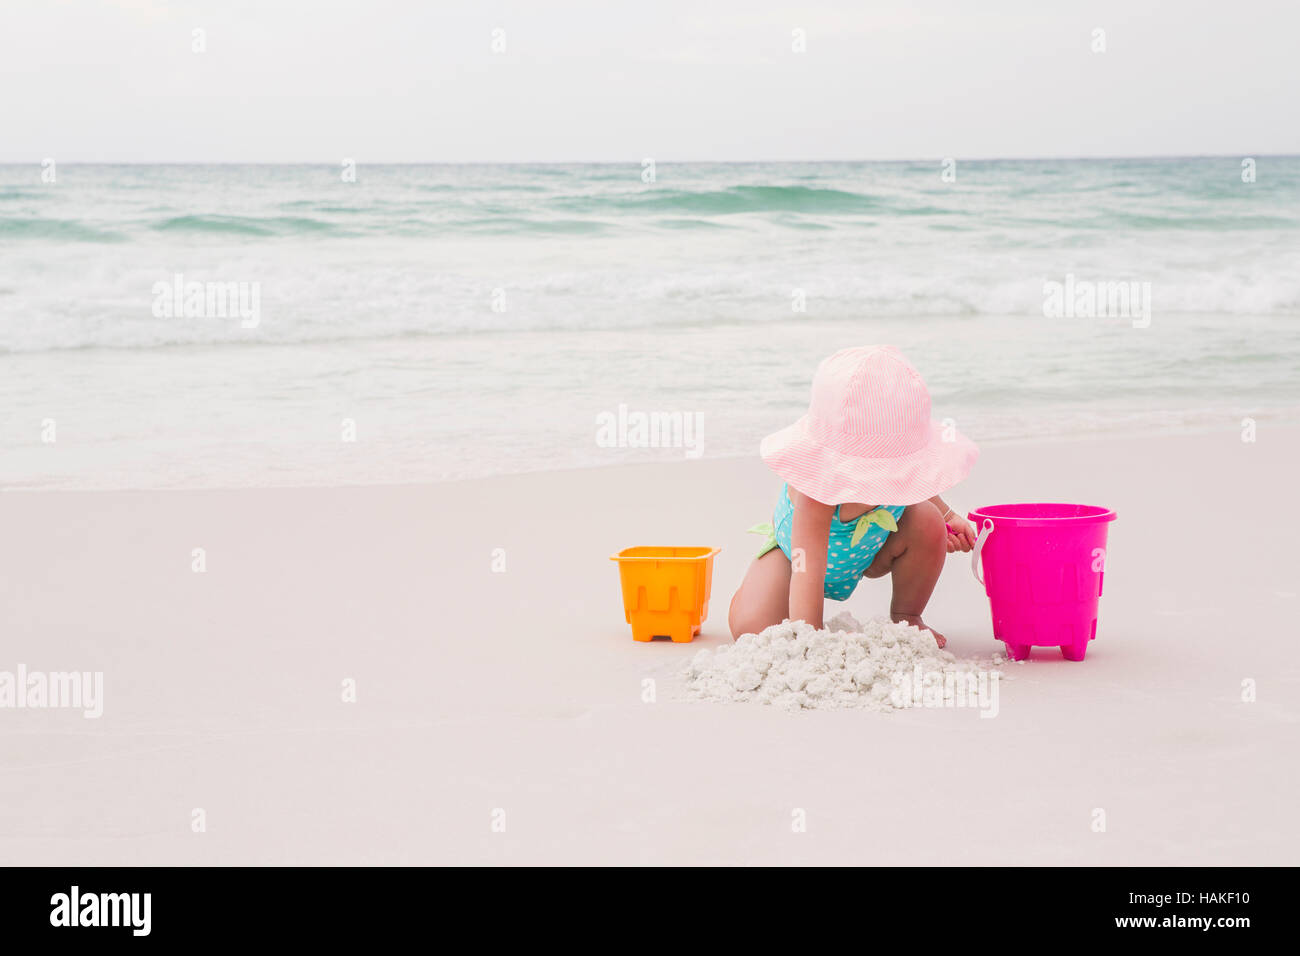 Toddler Girl Playing with Shovel and Bucket in Sand on Beach, Destin, Florida, USA Stock Photo